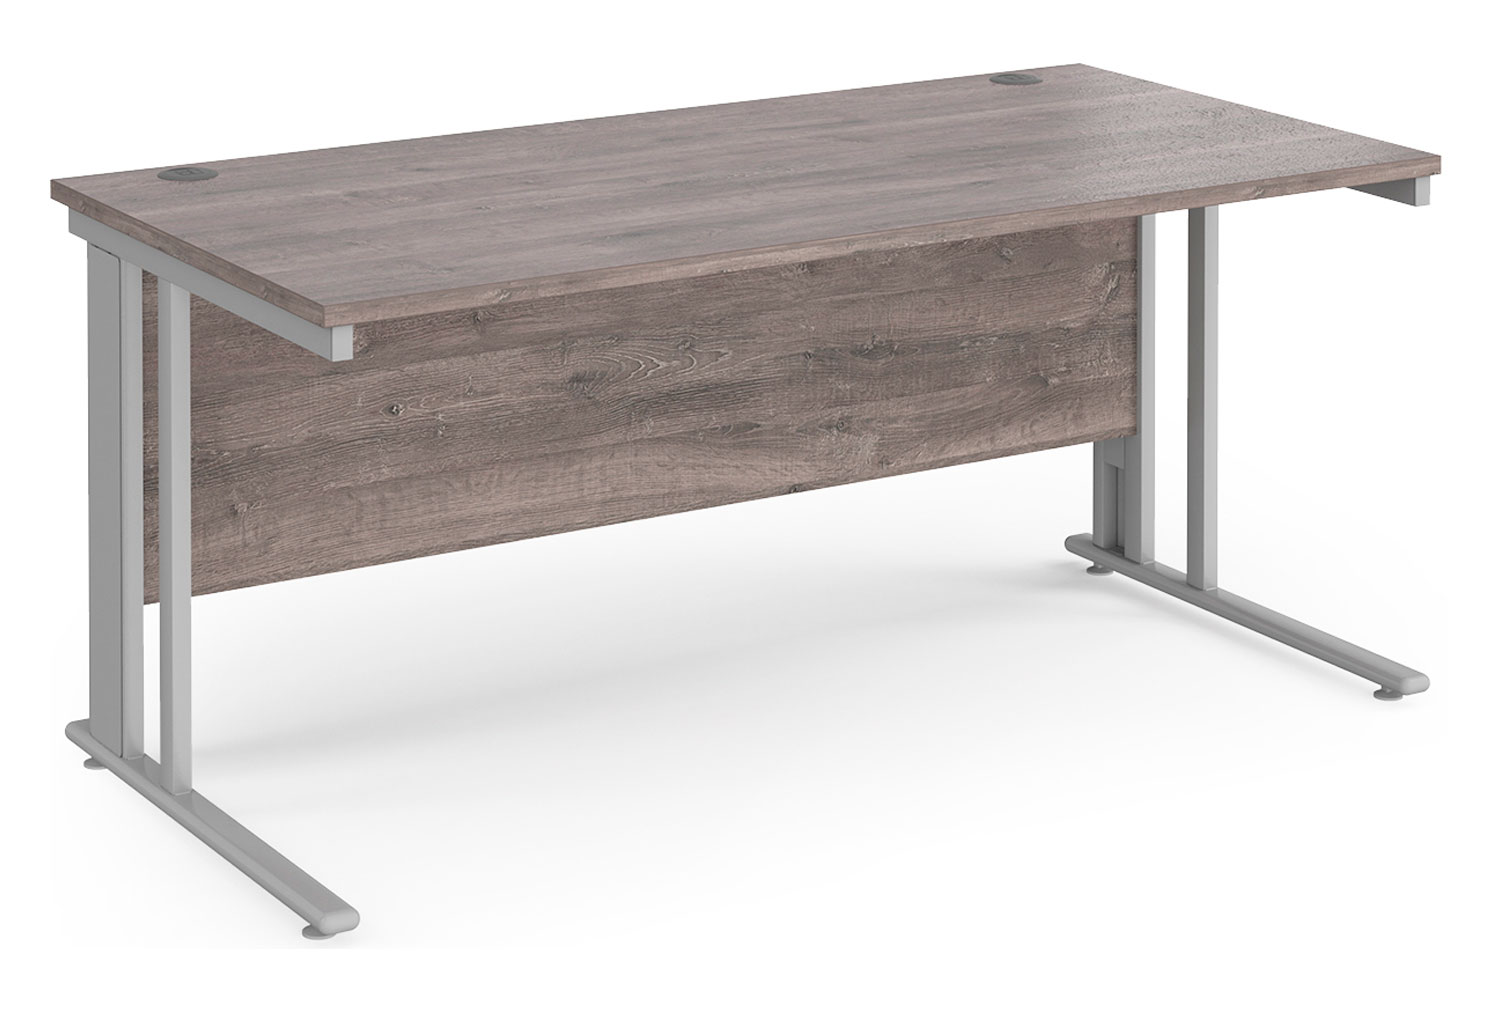 Value Line Deluxe Cable Managed Rectangular Office Desk (Silver Legs), 160wx80dx73h (cm), Grey Oak